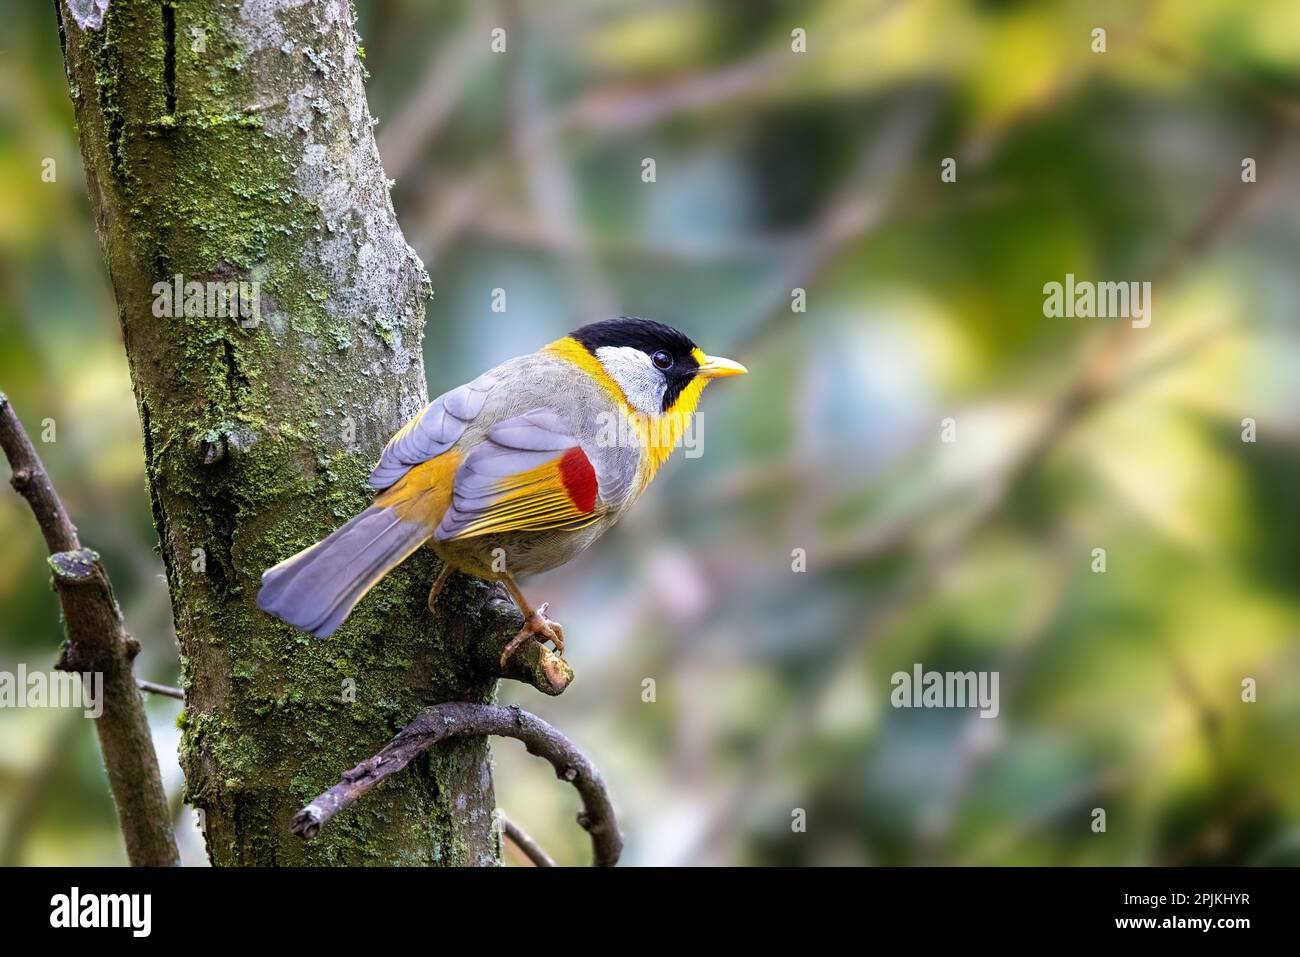 An adult silver-eared mesia, Leiothrix argentauris, is a small and colourful species of bird endemic to South East Asia. Perched on a dead log and wit Stock Photo